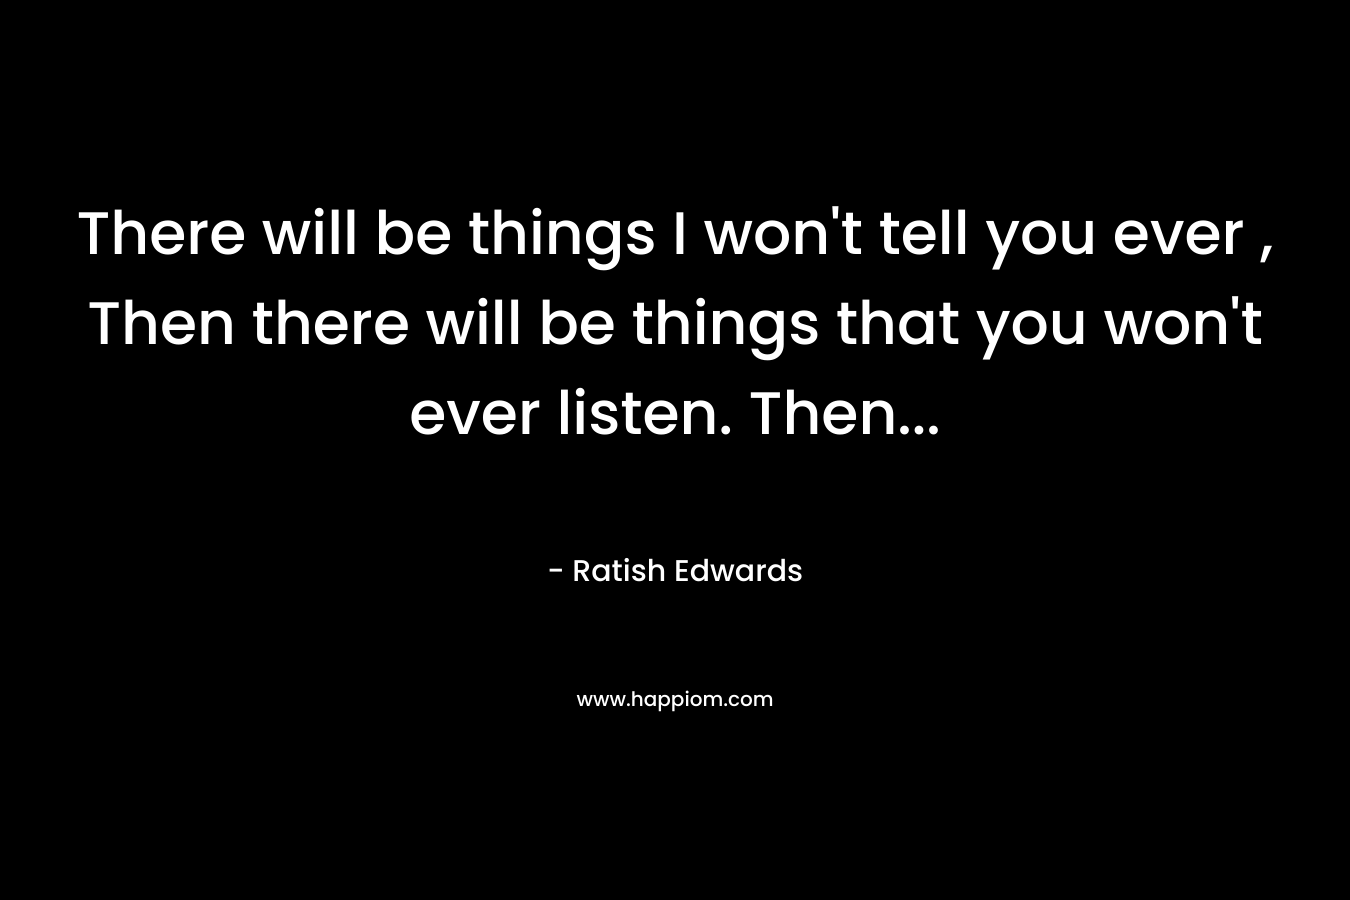 There will be things I won't tell you ever , Then there will be things that you won't ever listen. Then...